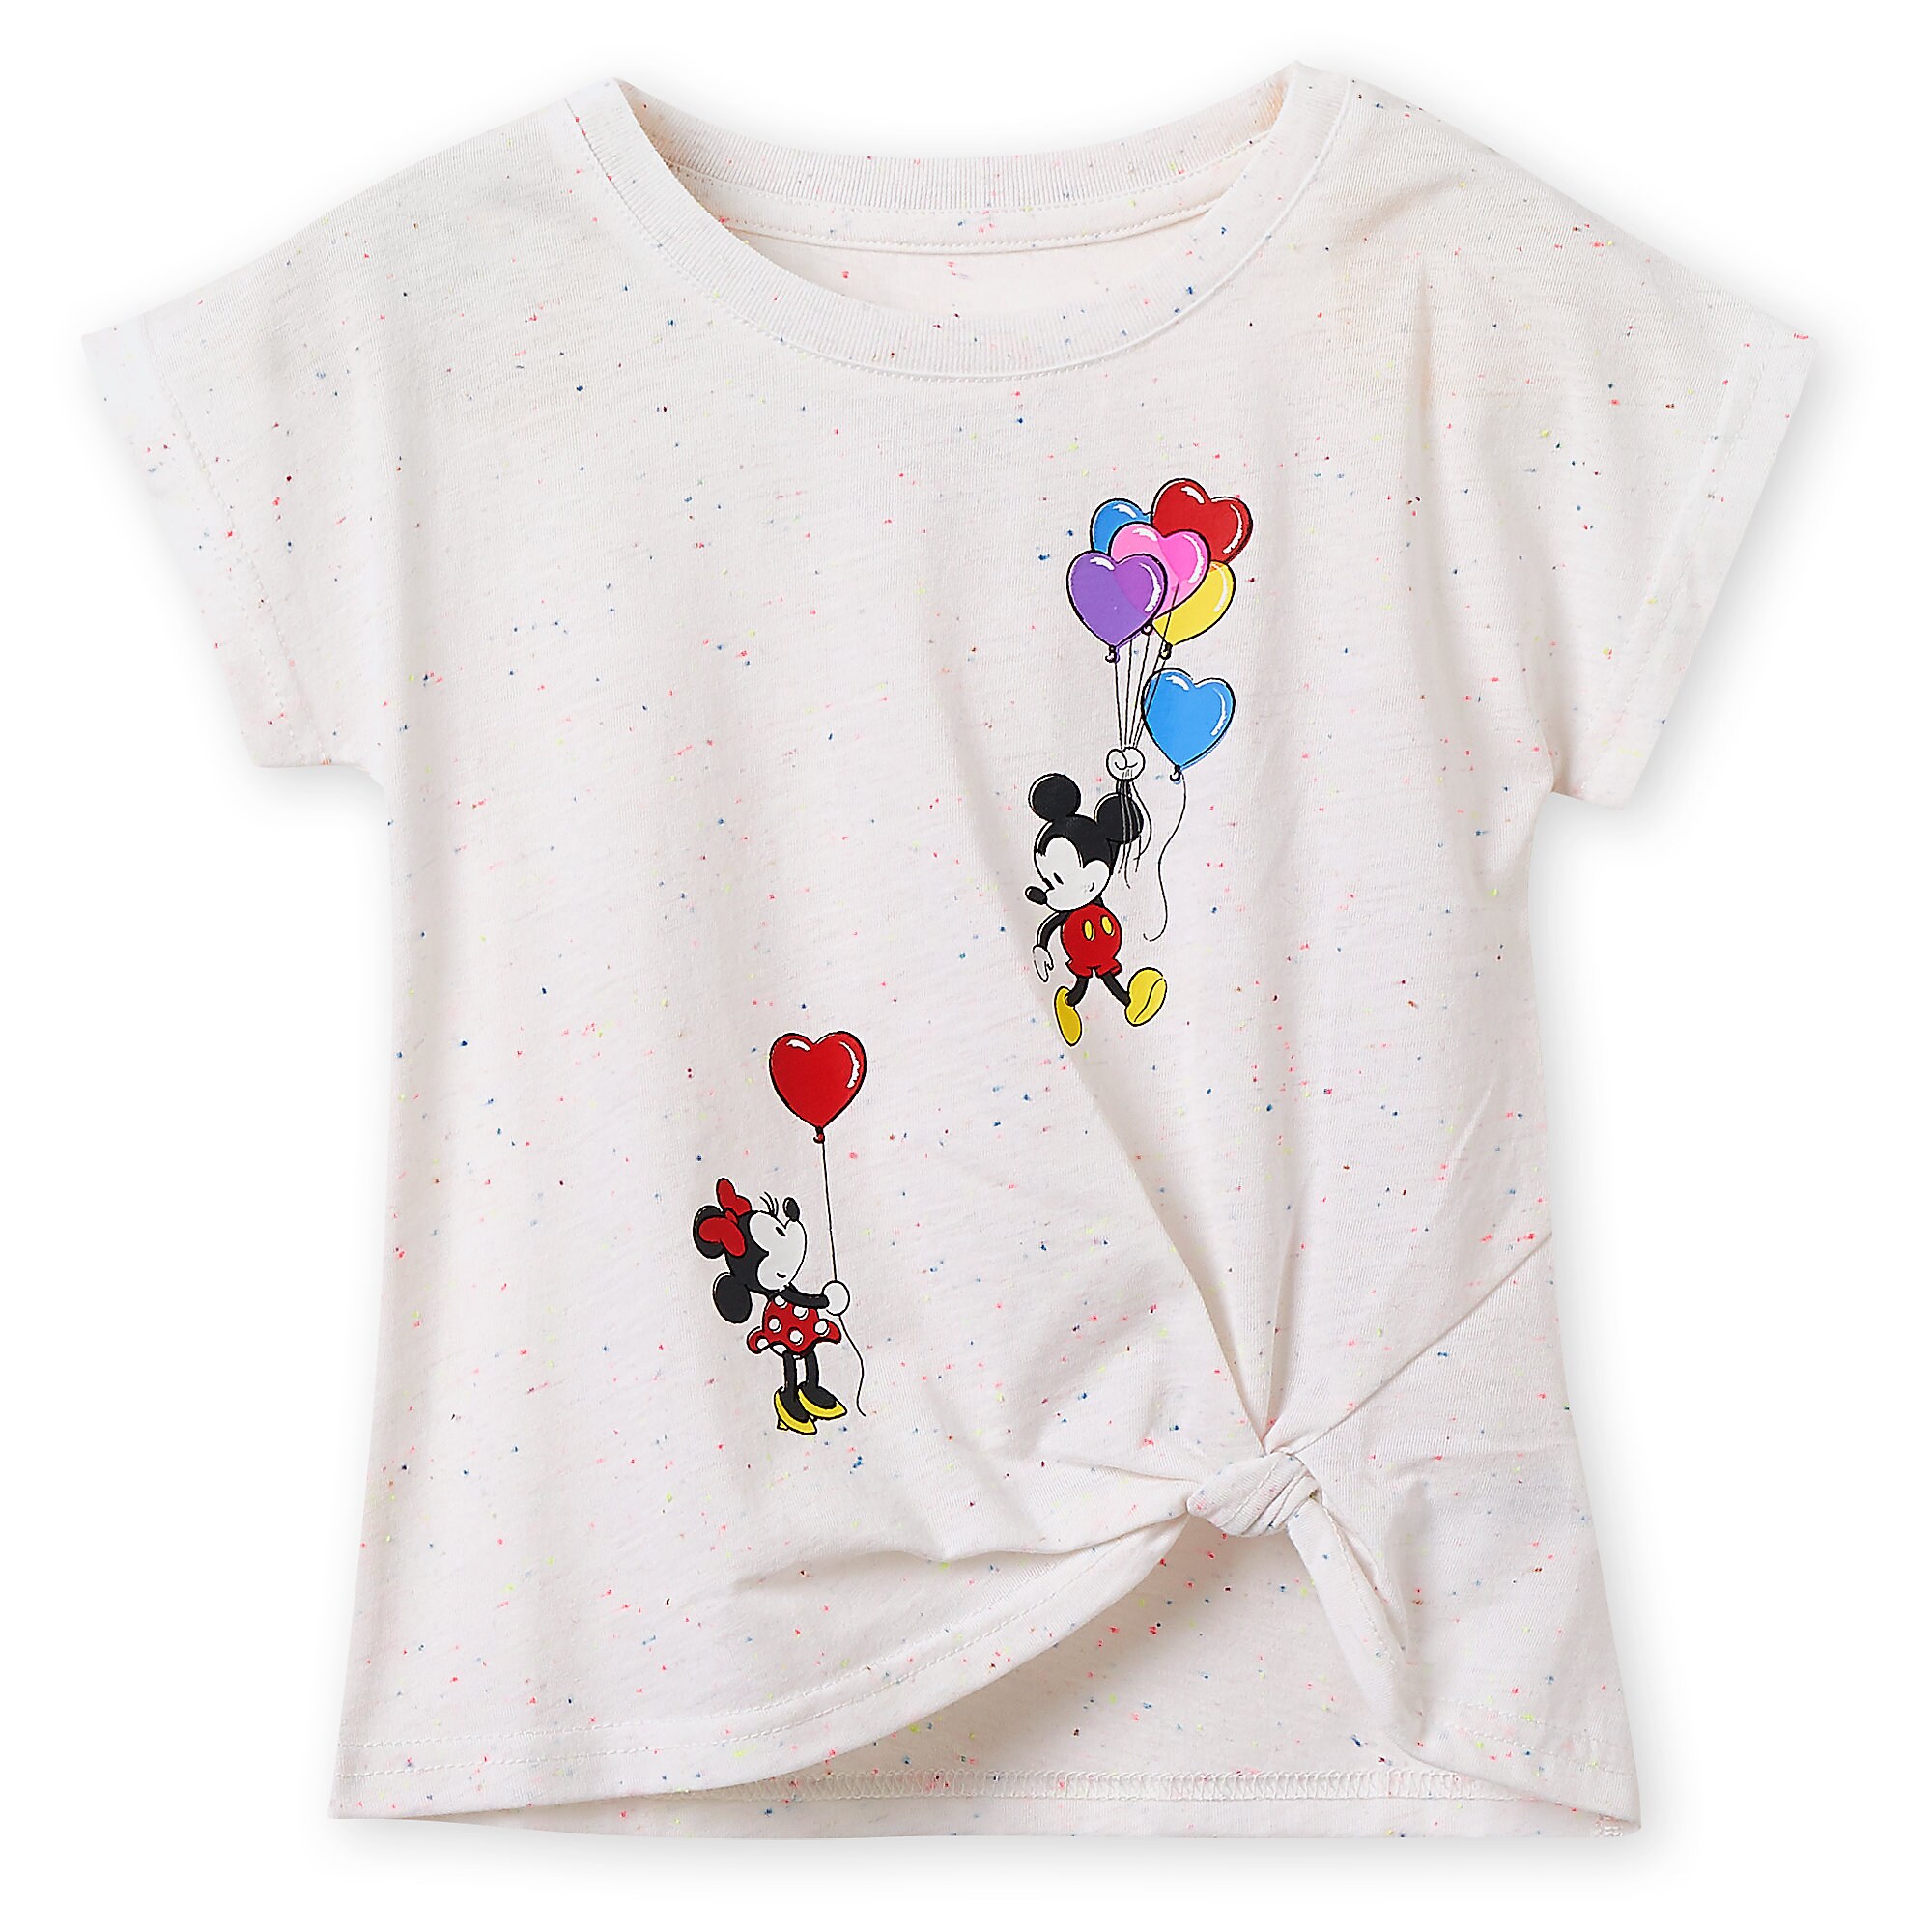 Mickey and Minnie Mouse Balloons T-Shirt for Girls